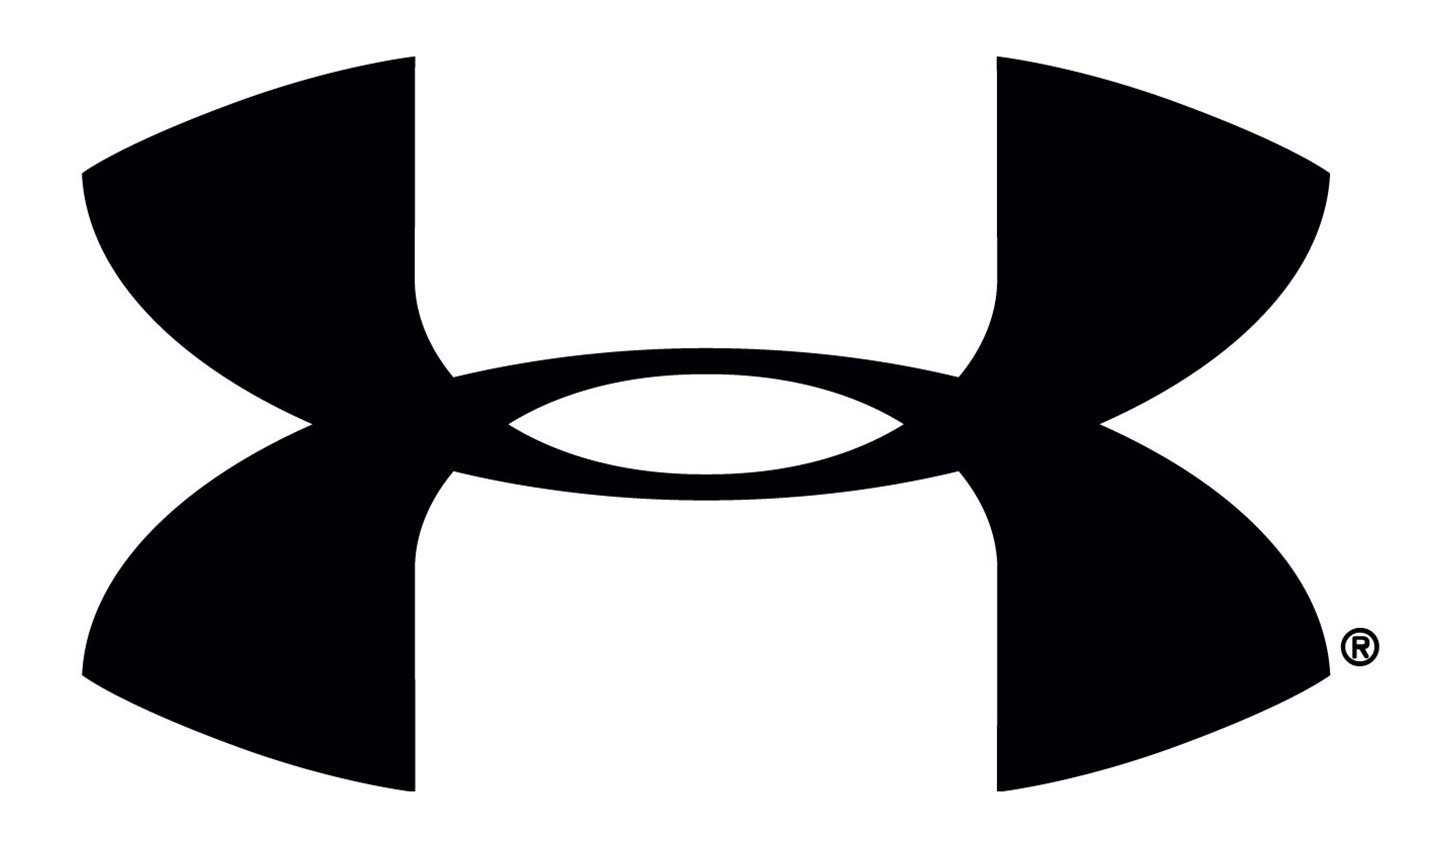 Under Armour Logo Wallpaper 5695 Hd Wallpapers in Logos   Imagescicom